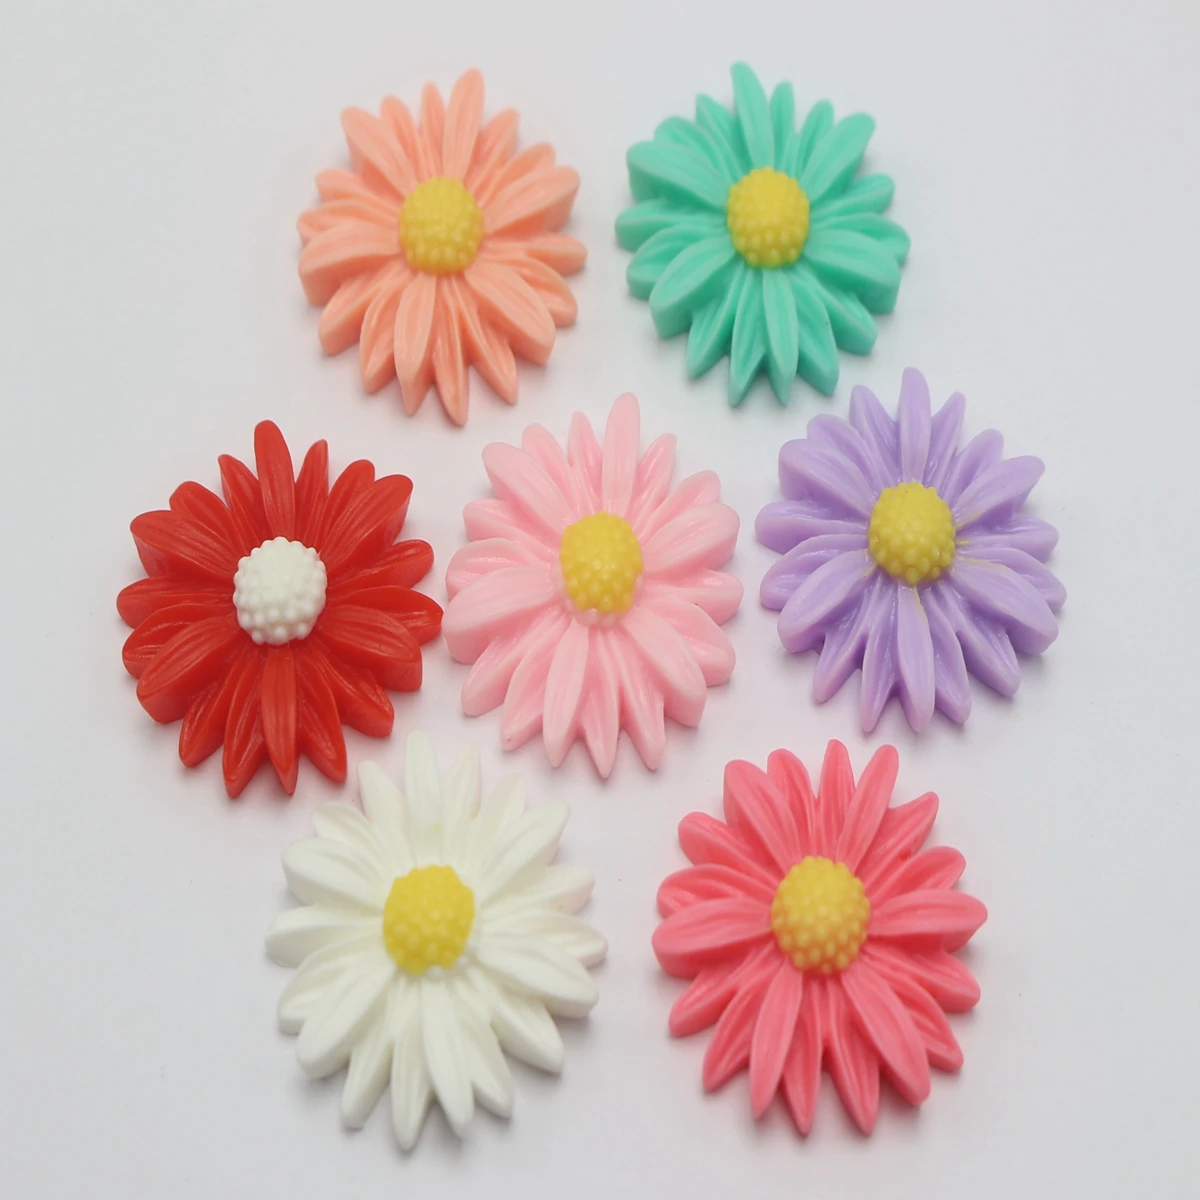 

20 Mixed Color Large Flatback Resin Daisy Flower Sunflower Cabochons 26mm(1")